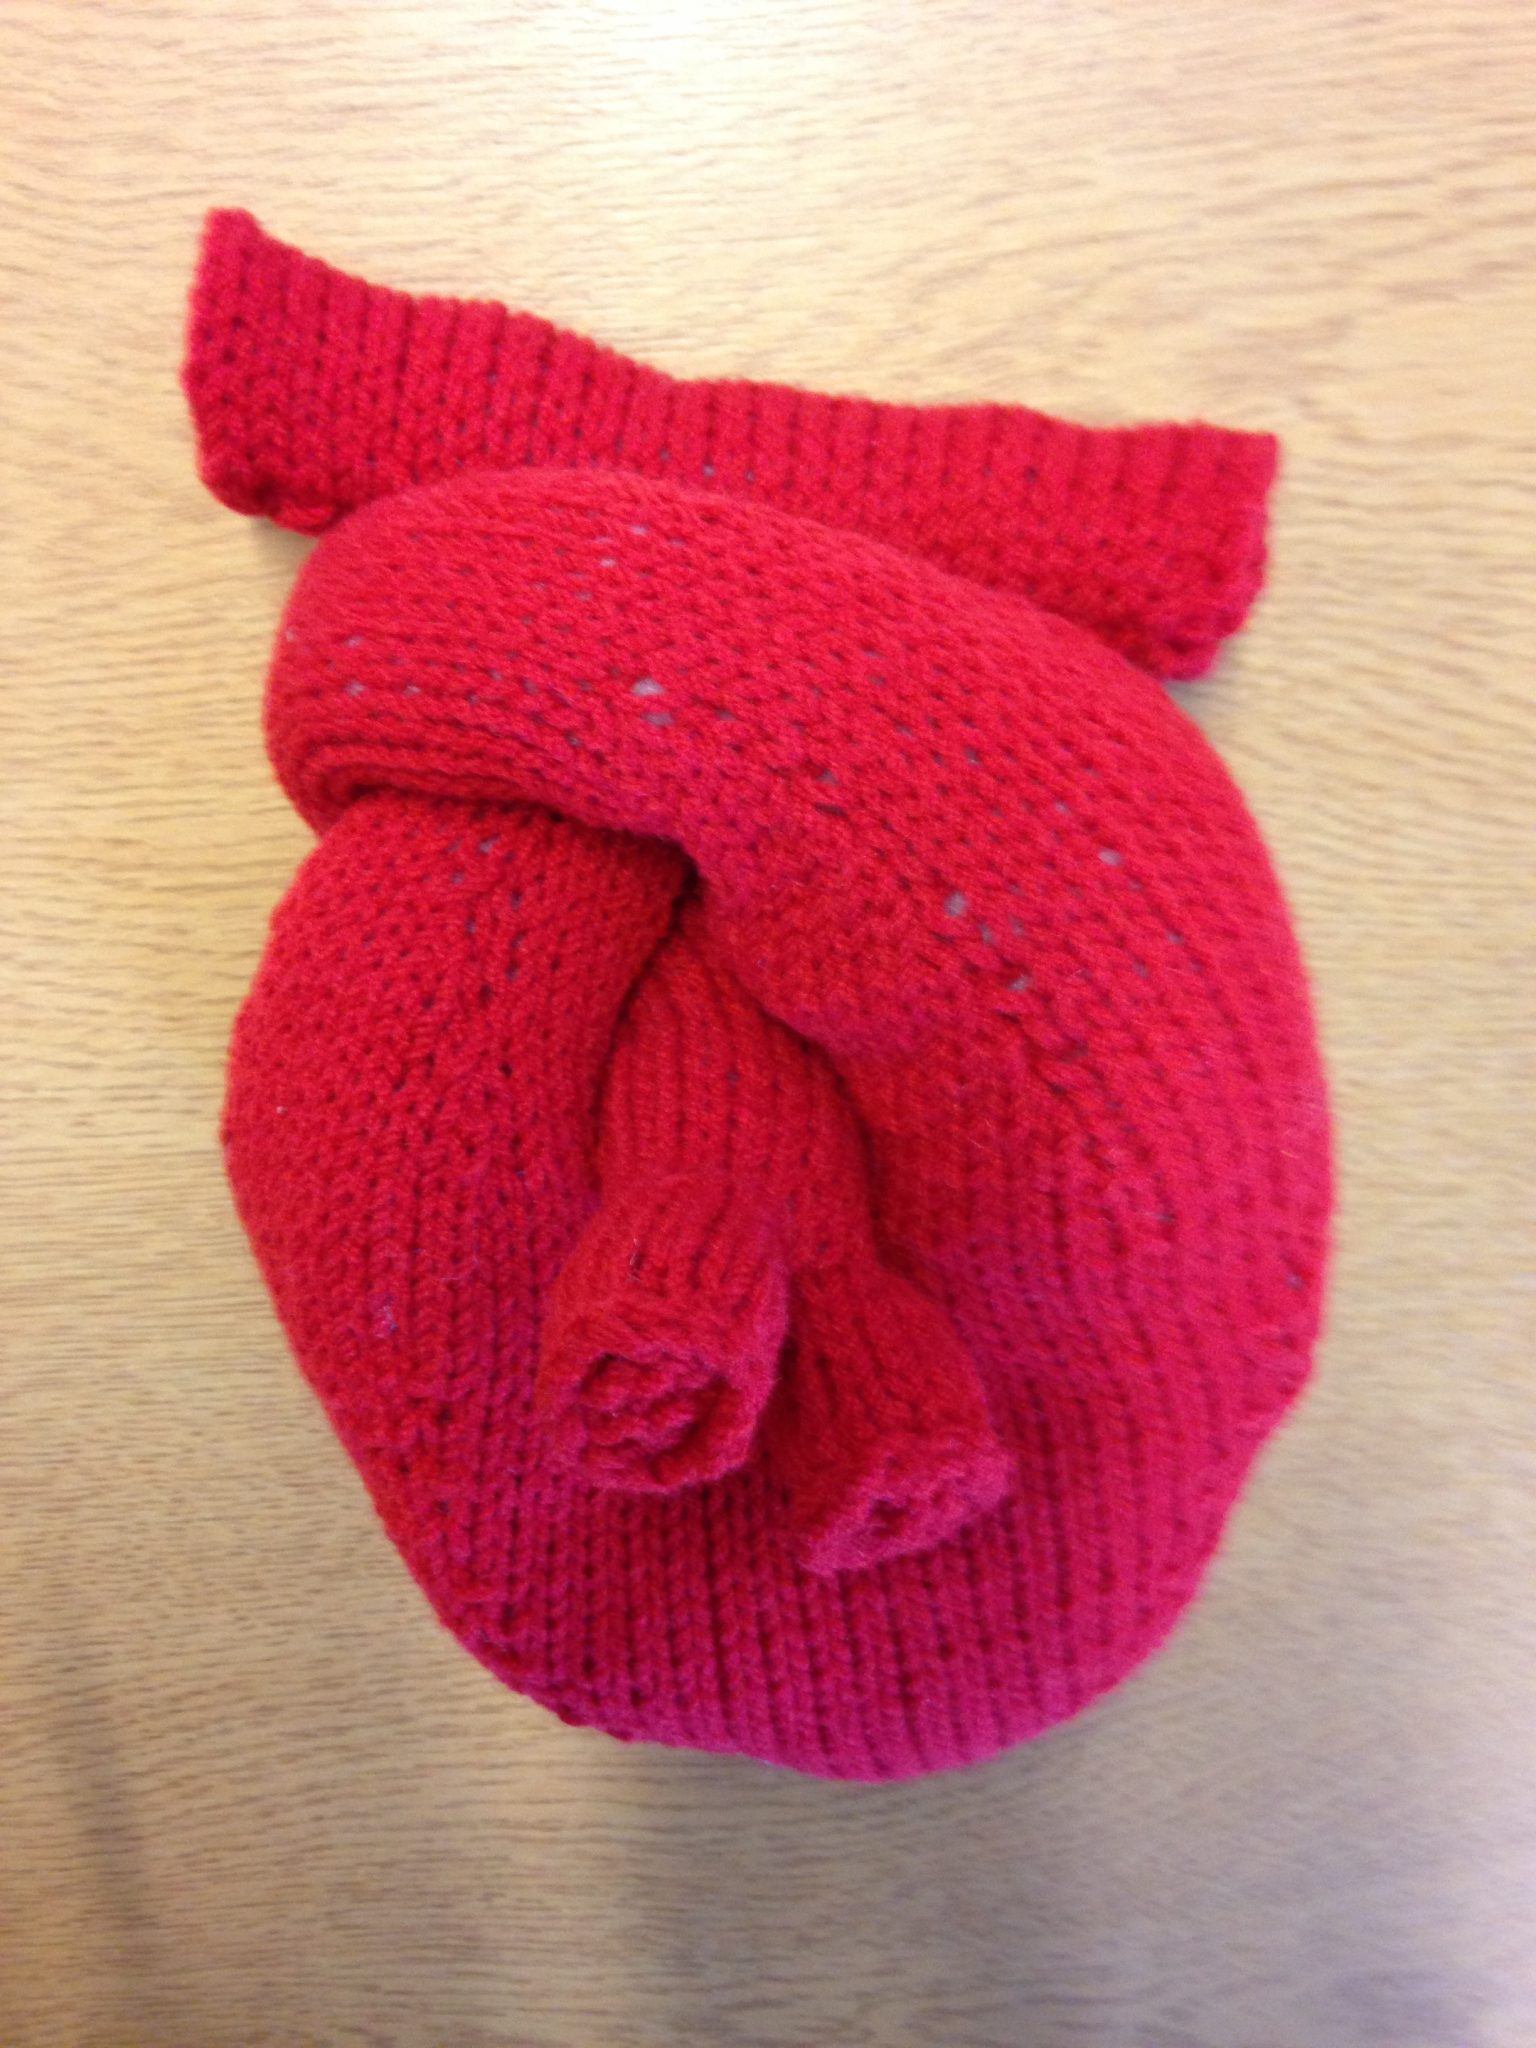 Knitted Anatomical Heart